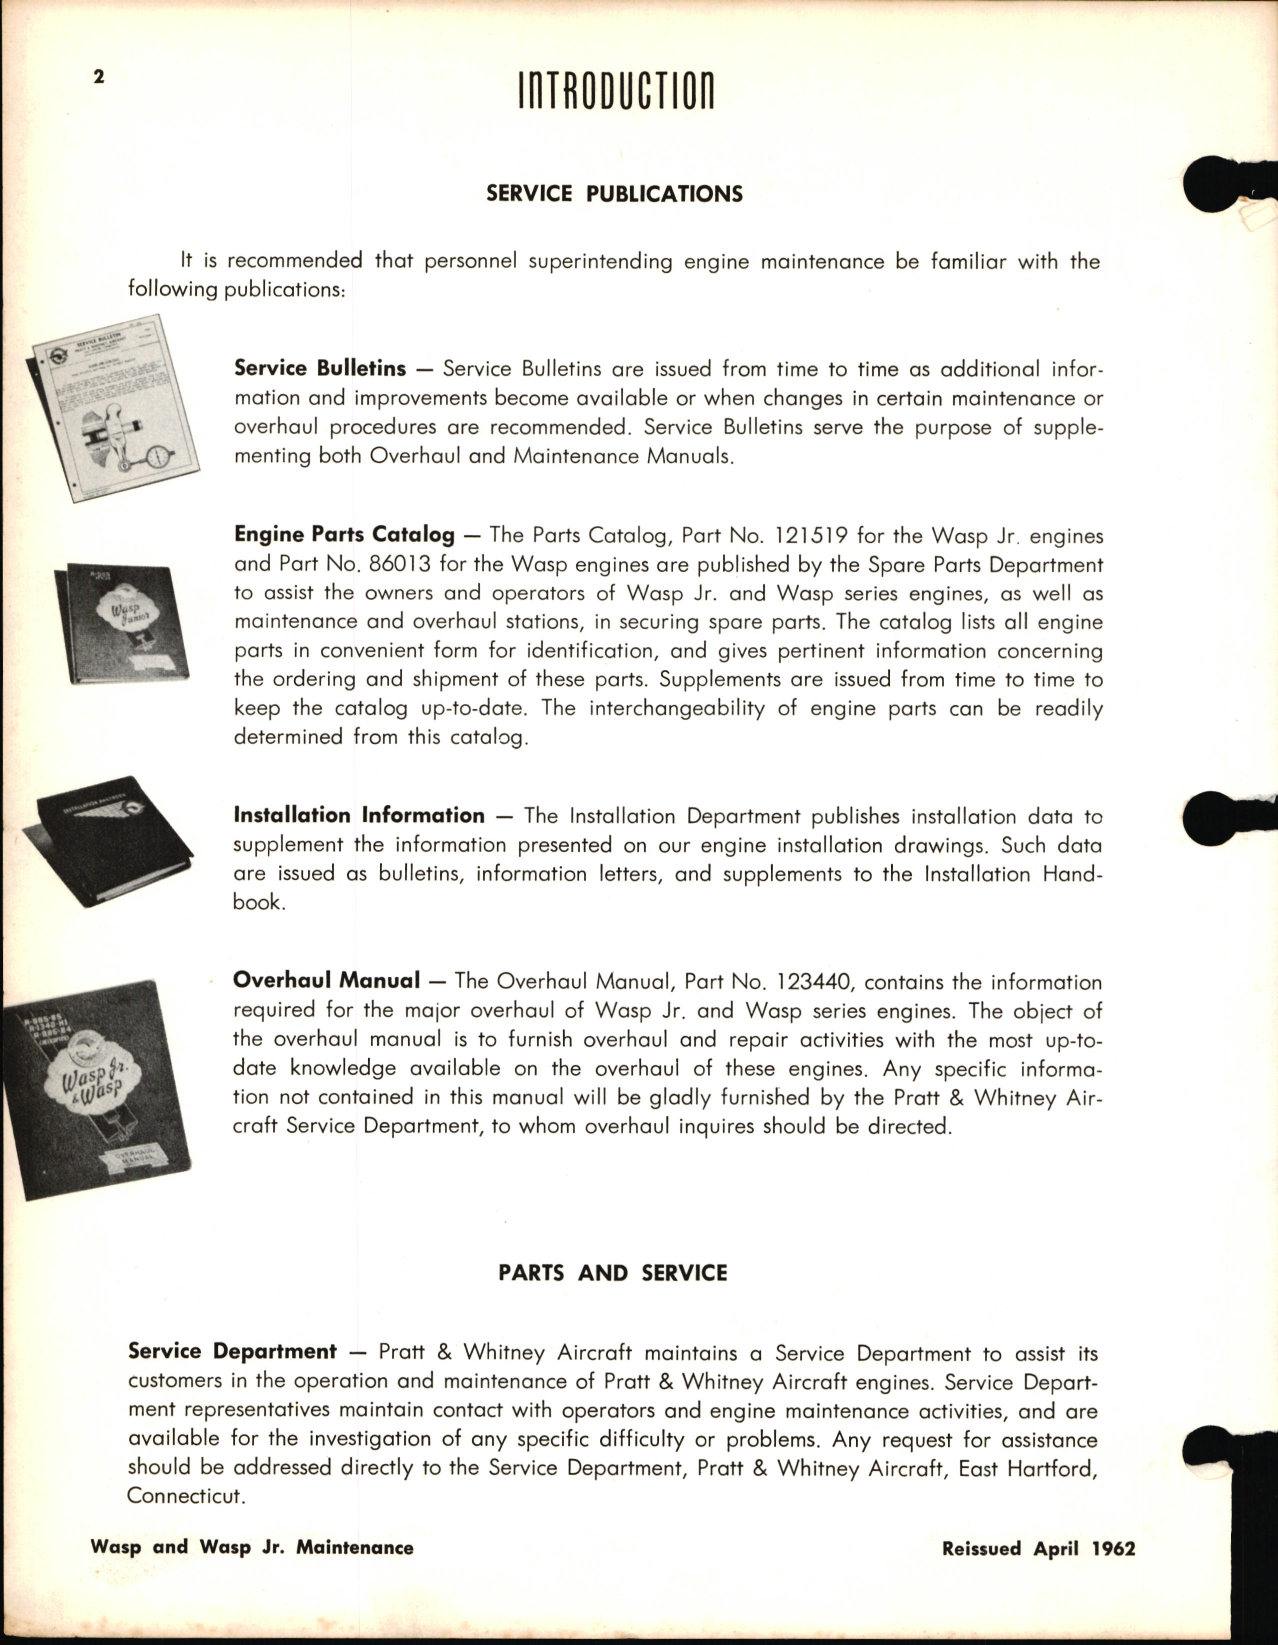 Sample page 6 from AirCorps Library document: Maintenance Manual for Wasp Jr. and Wasp Engines